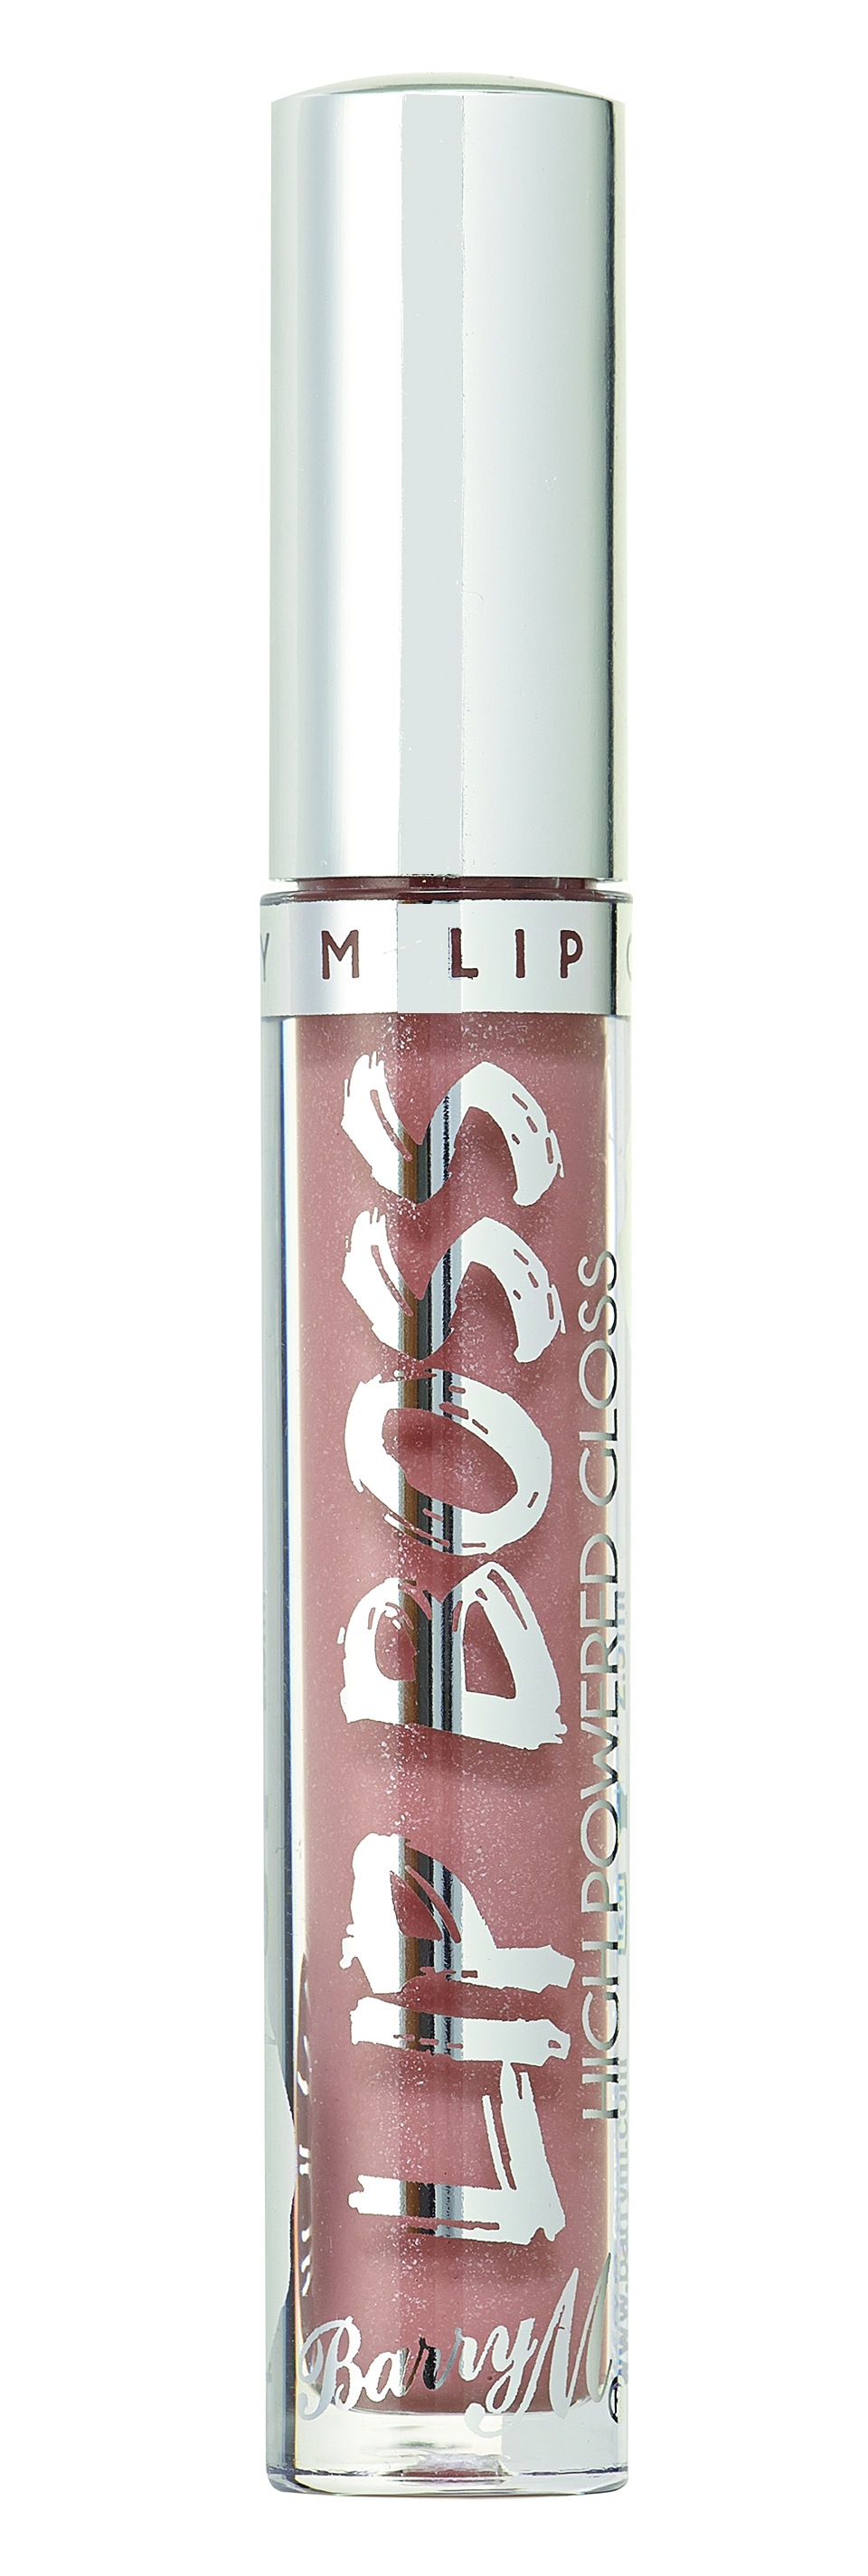 Barry M Lip Boss # 5 Thinking Outside Of The Box